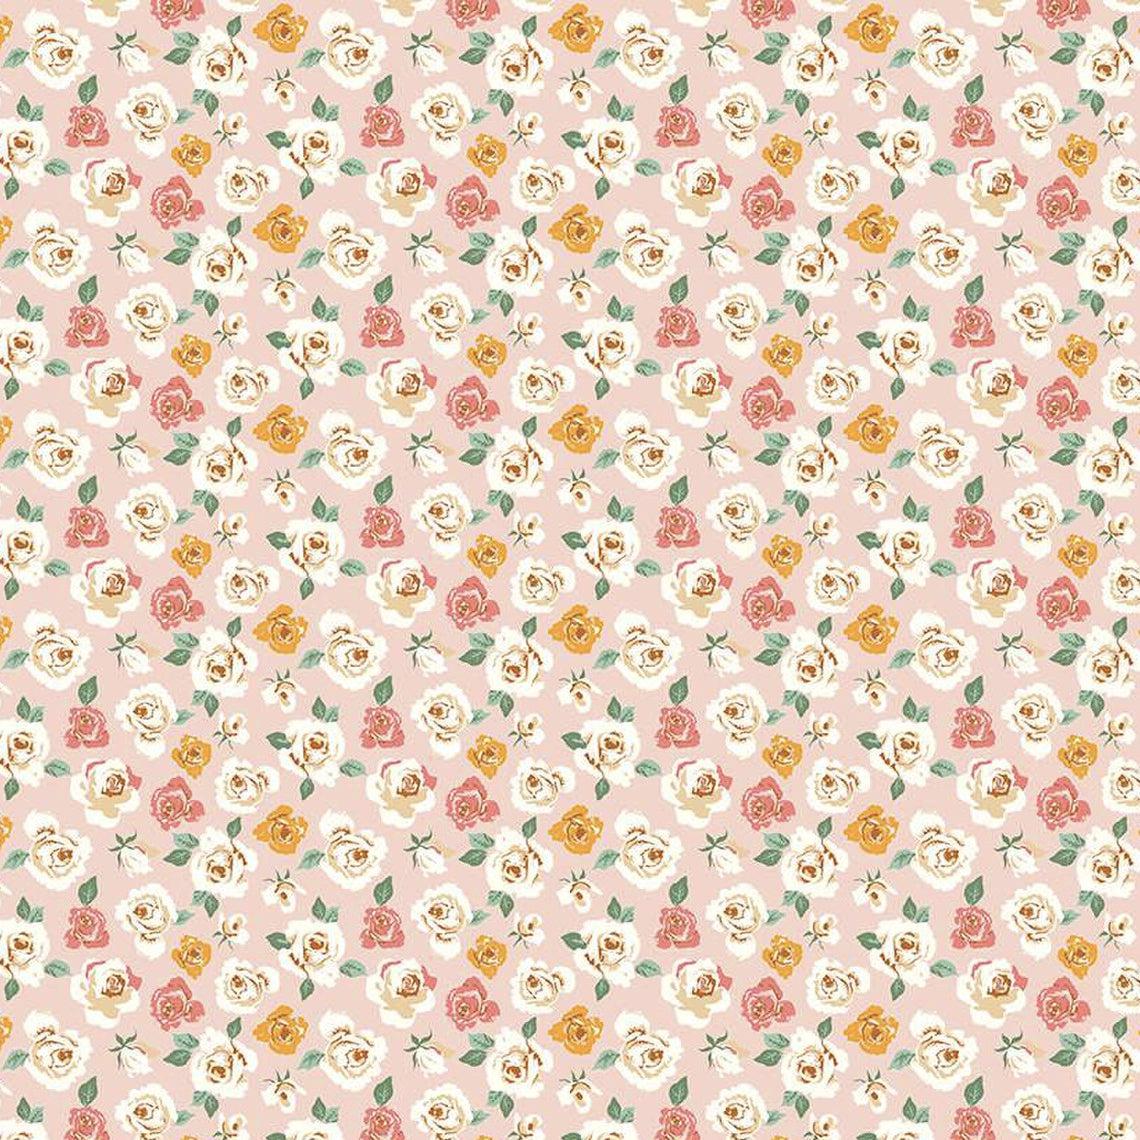 BloomBerry Blush Tiny Roses Fabric